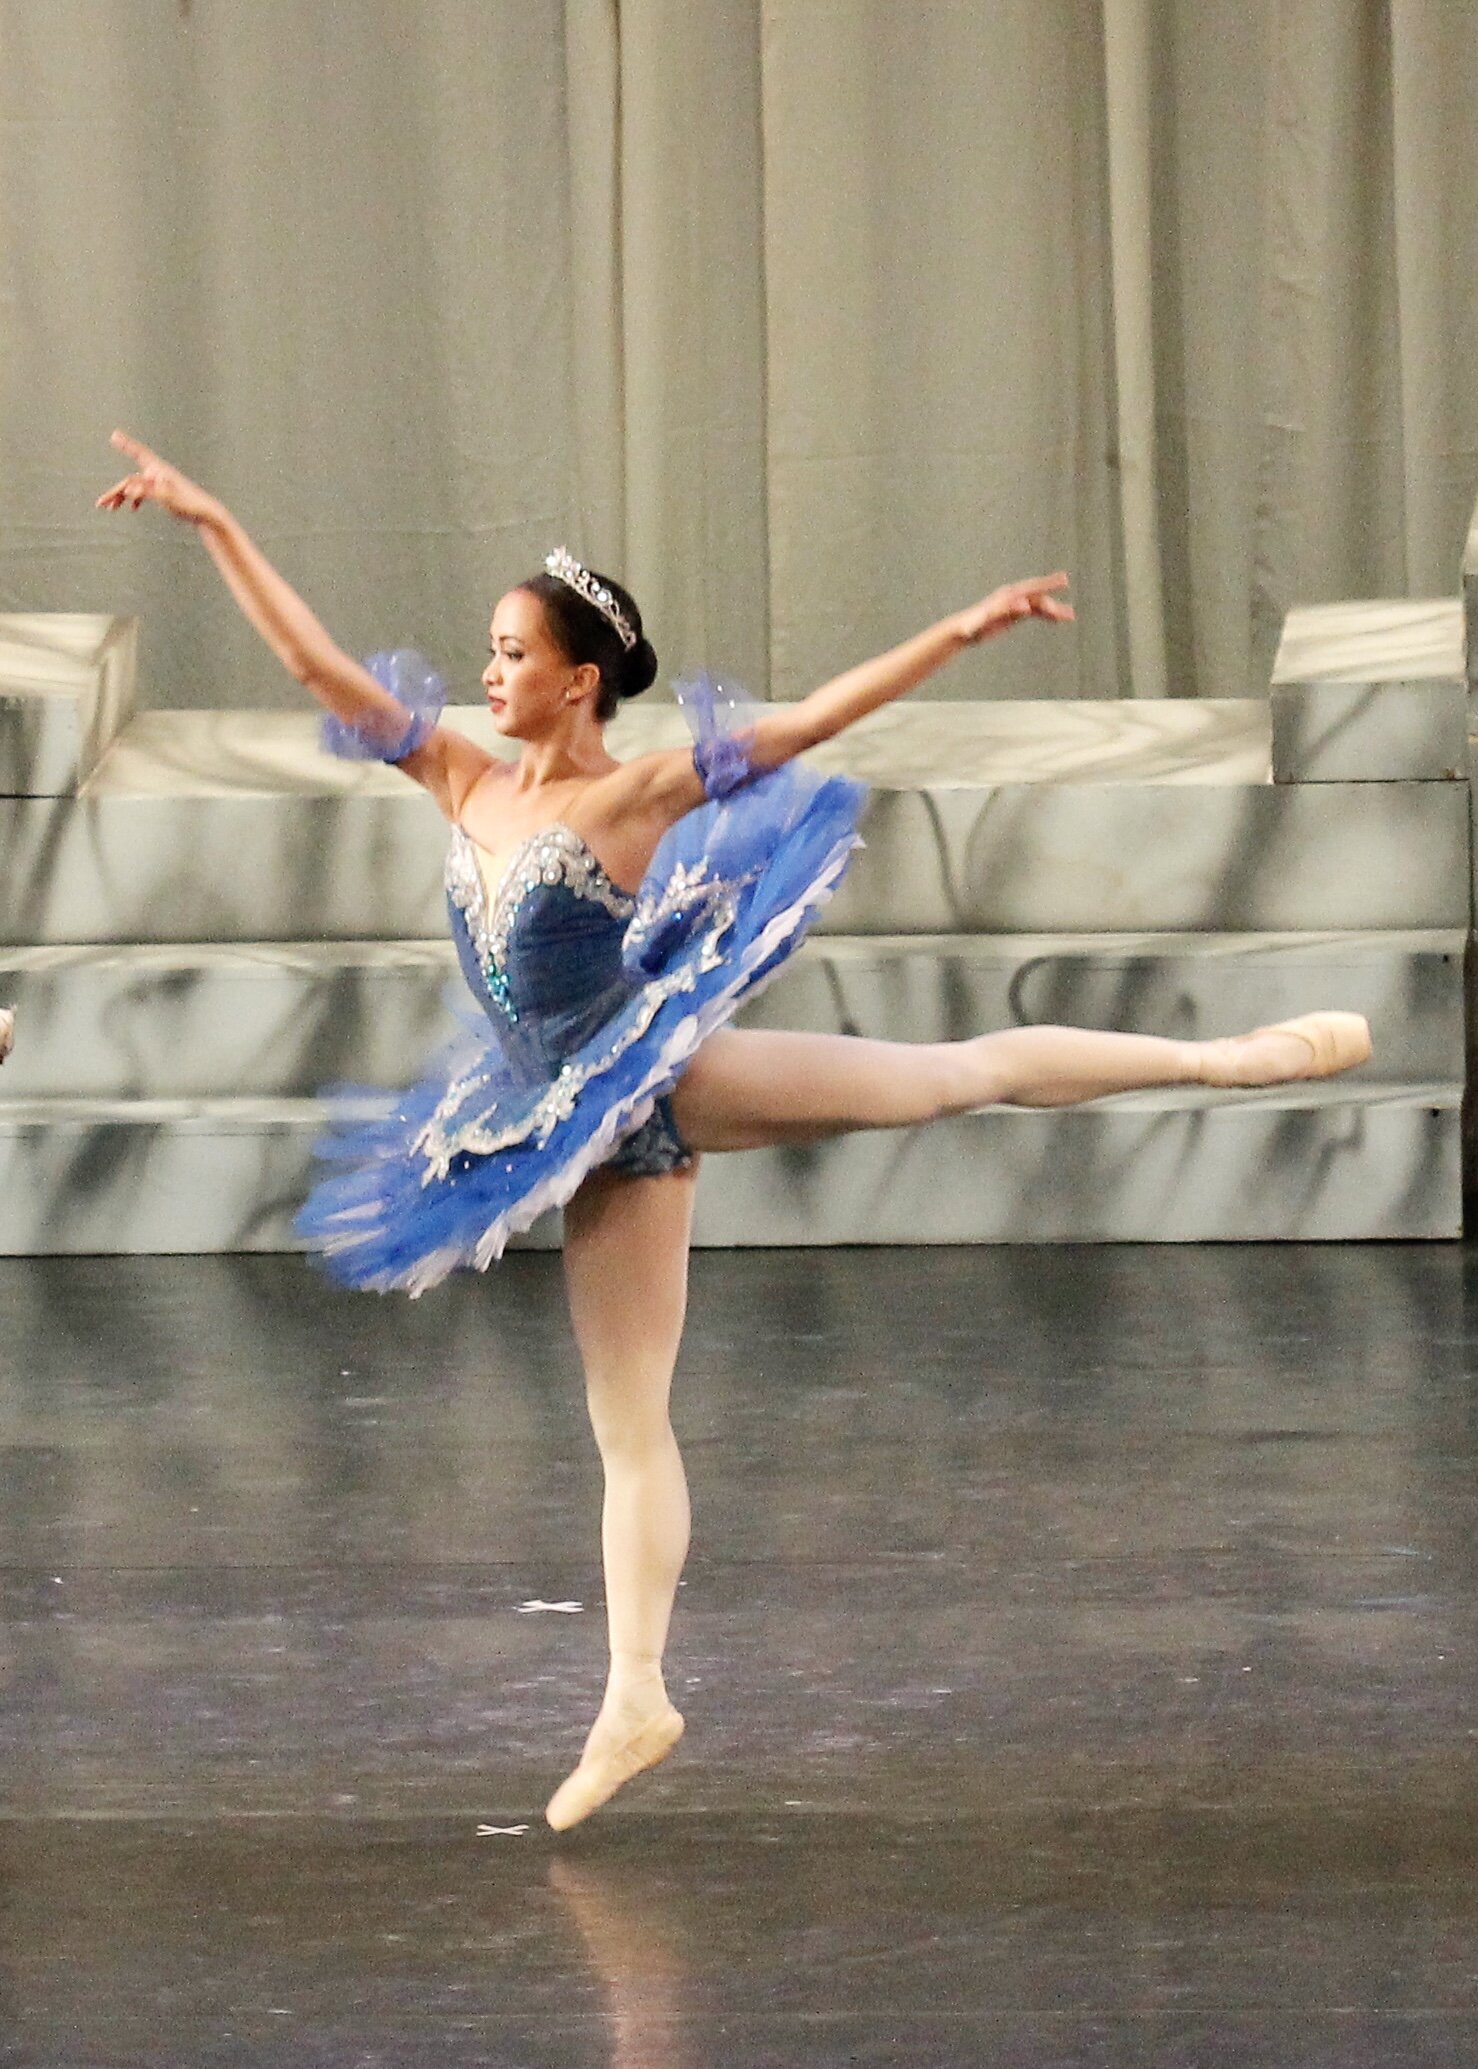    Sapphire and silver are an appealing mix in Jessa Balote’s tutu as she dances as one of the Jewel Fairies in  The Swan, The Fairy and The Princess,  2016. Photo by Kurt Alvarez   